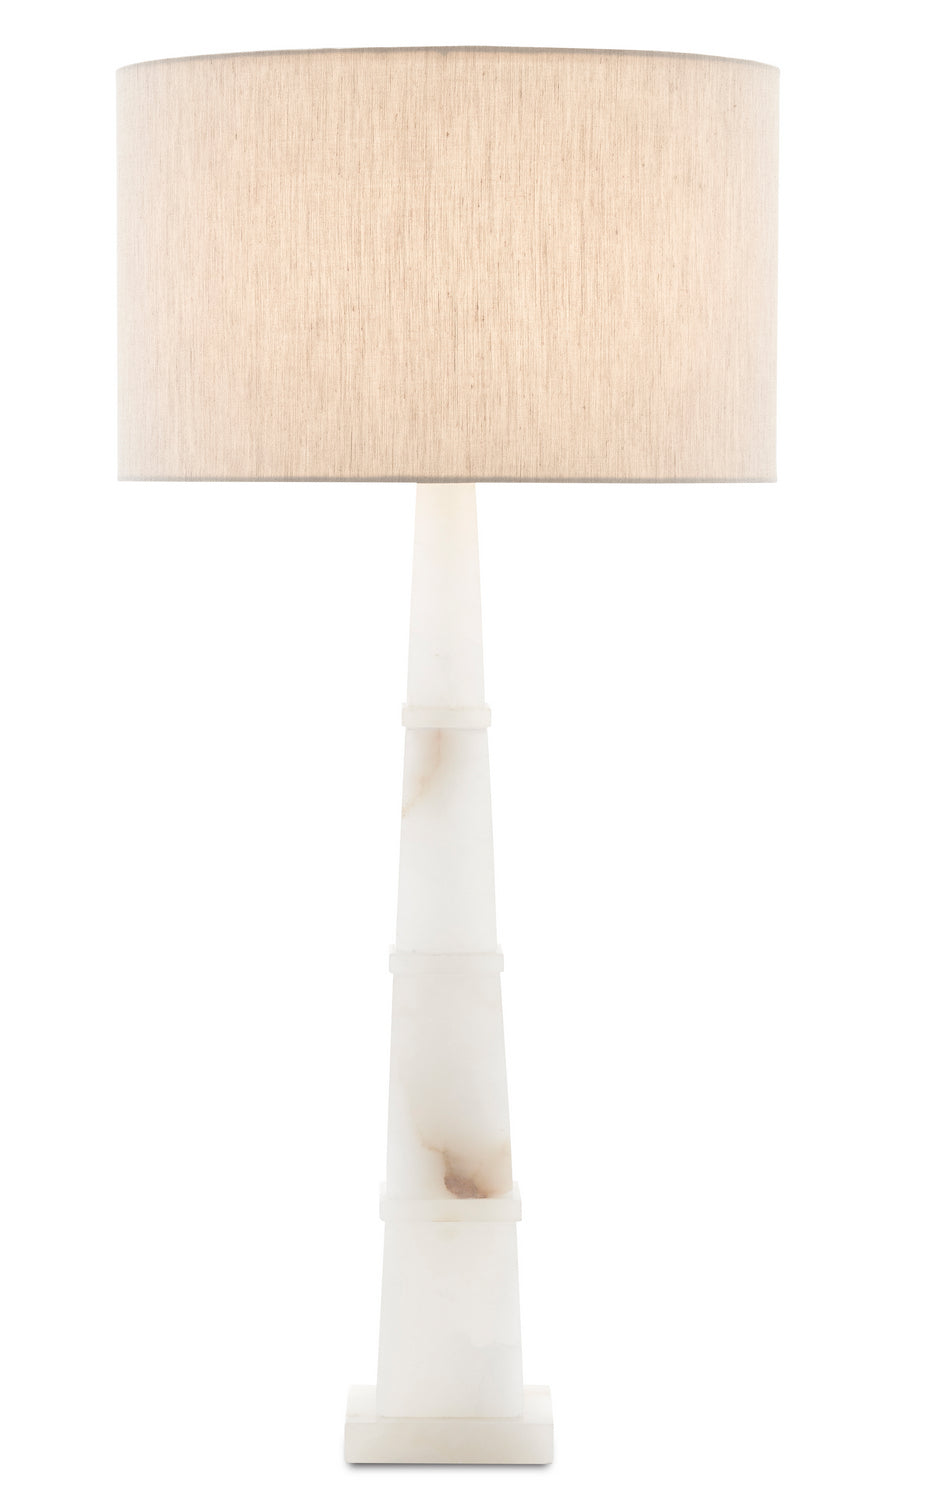 One Light Table Lamp from the Alabastro collection in Alabaster/Polished Nickel finish